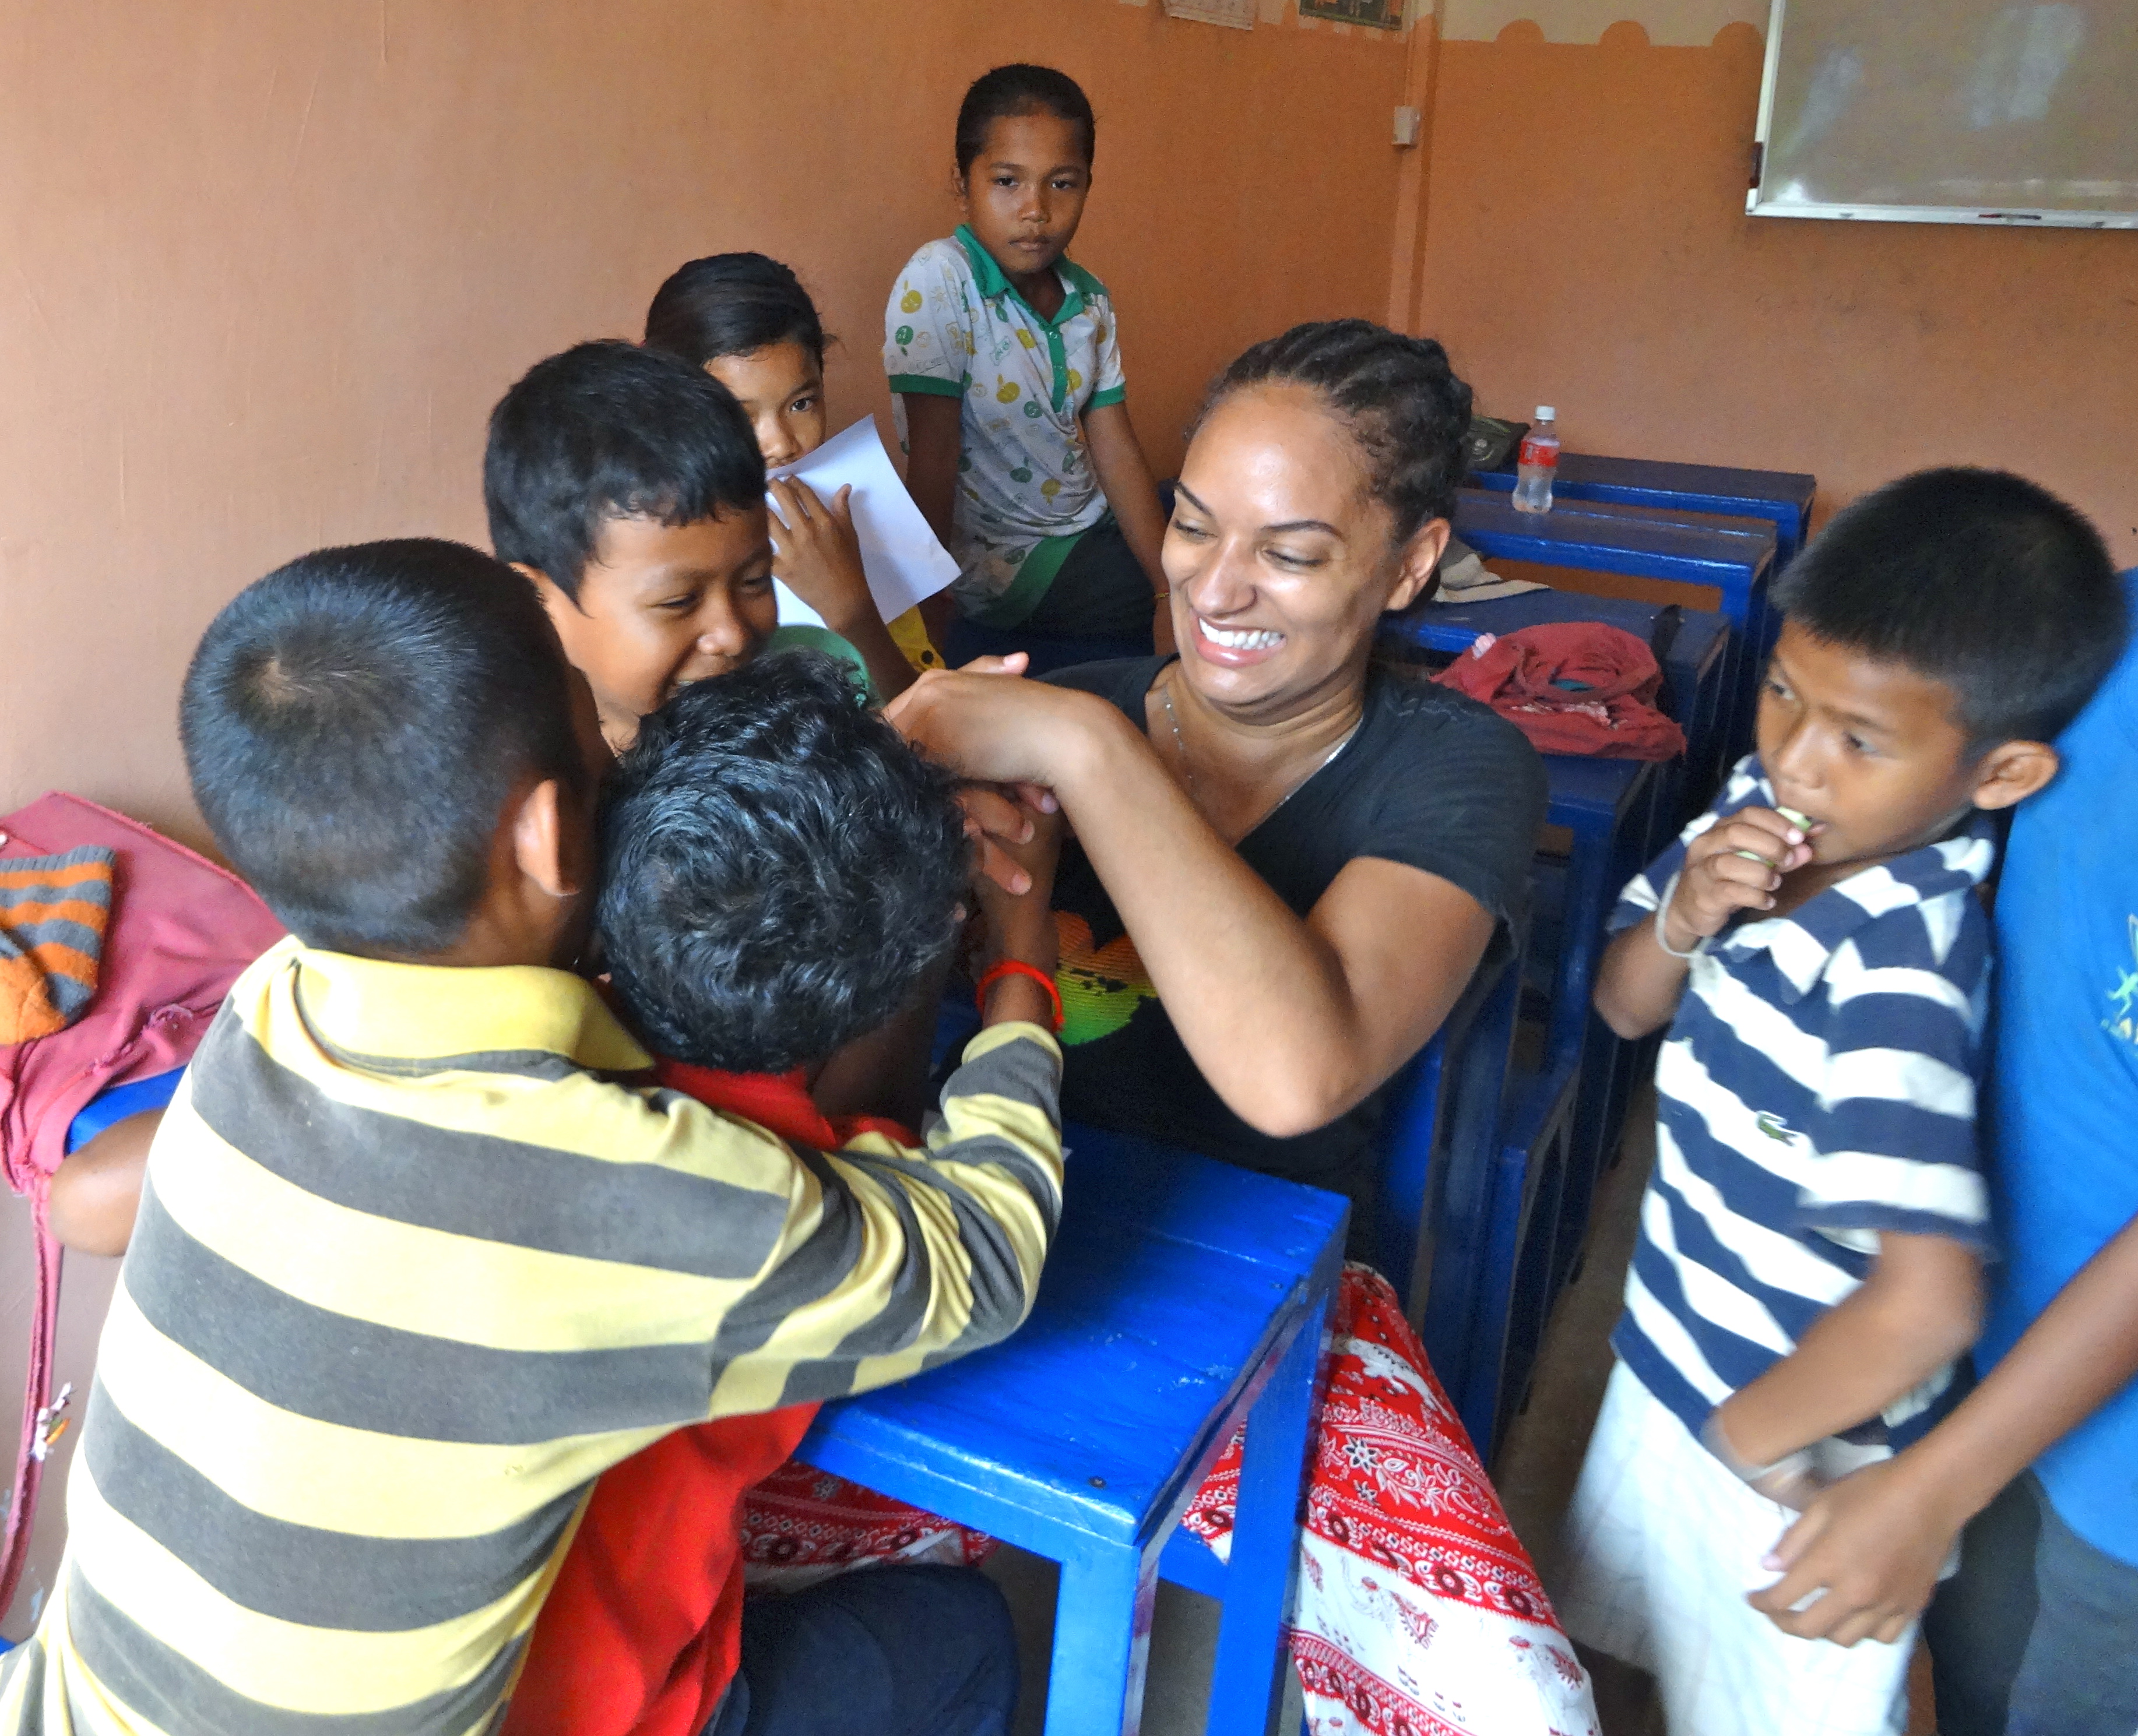 Top Tips for Volunteering with Children Abroad